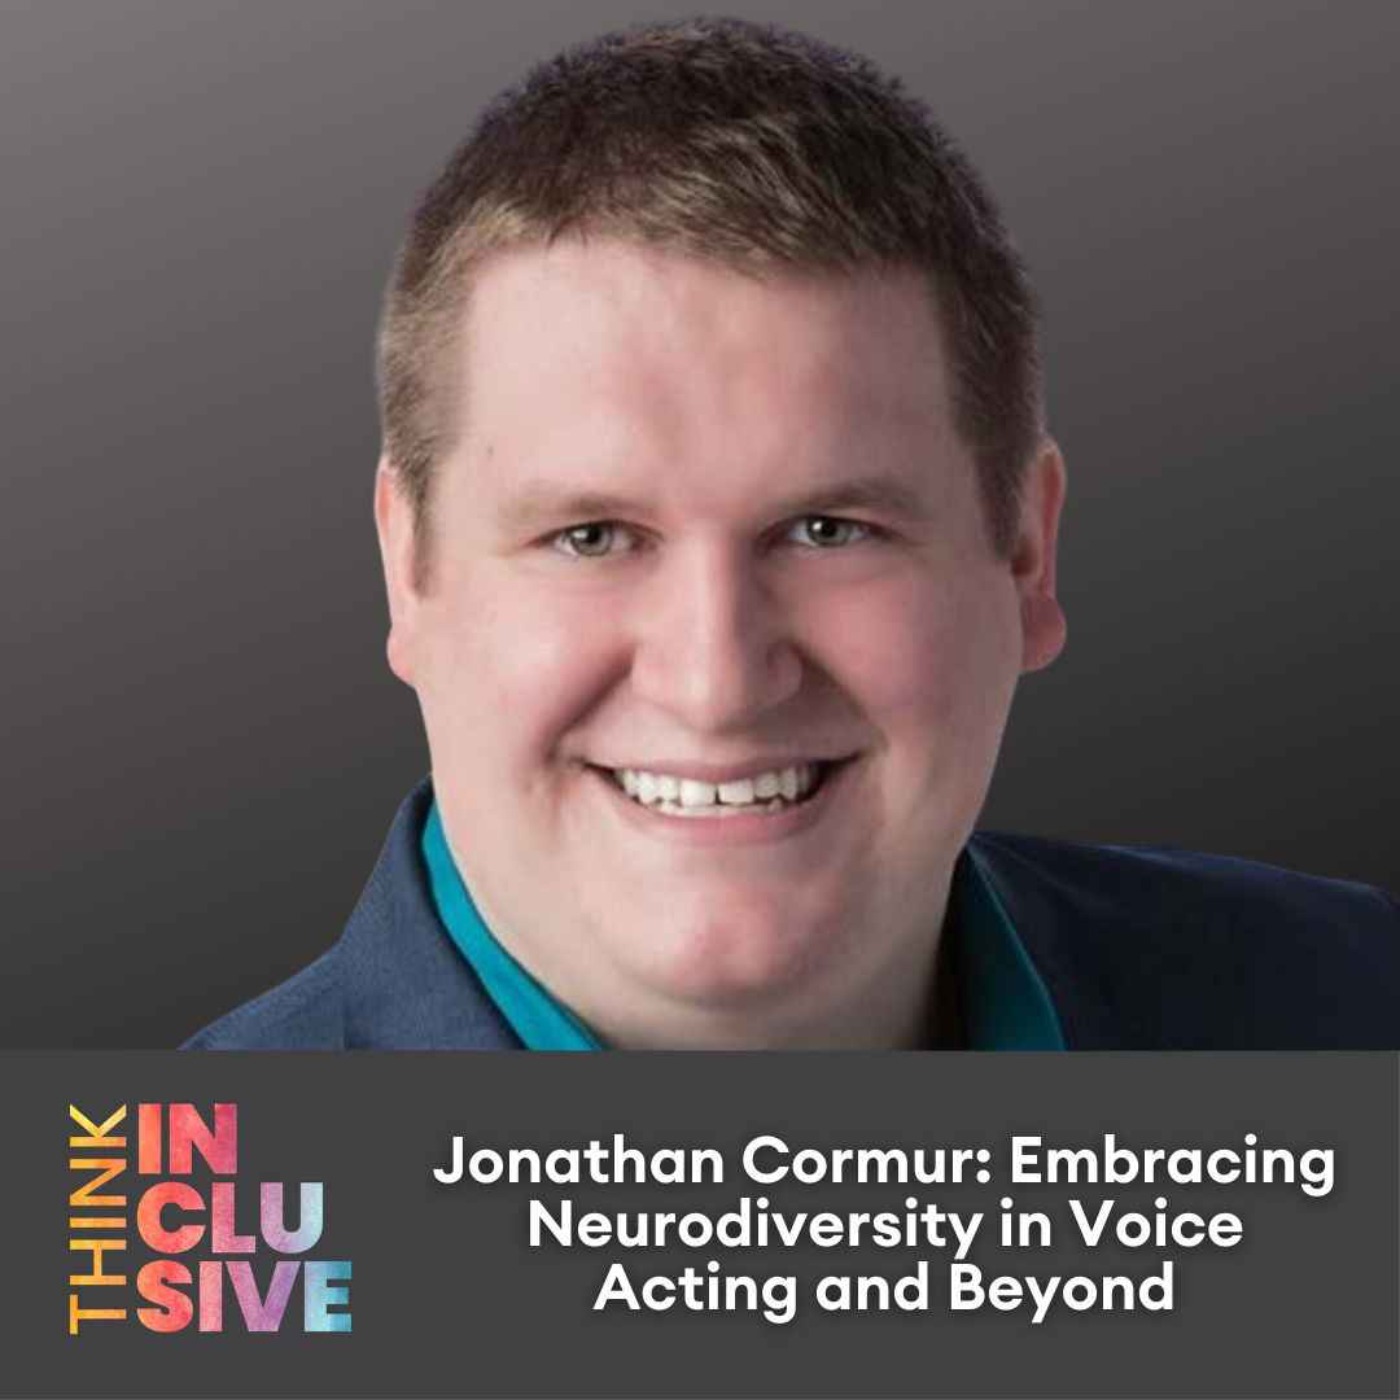 Jonathan Cormur: Embracing Neurodiversity in Voice Acting and Beyond